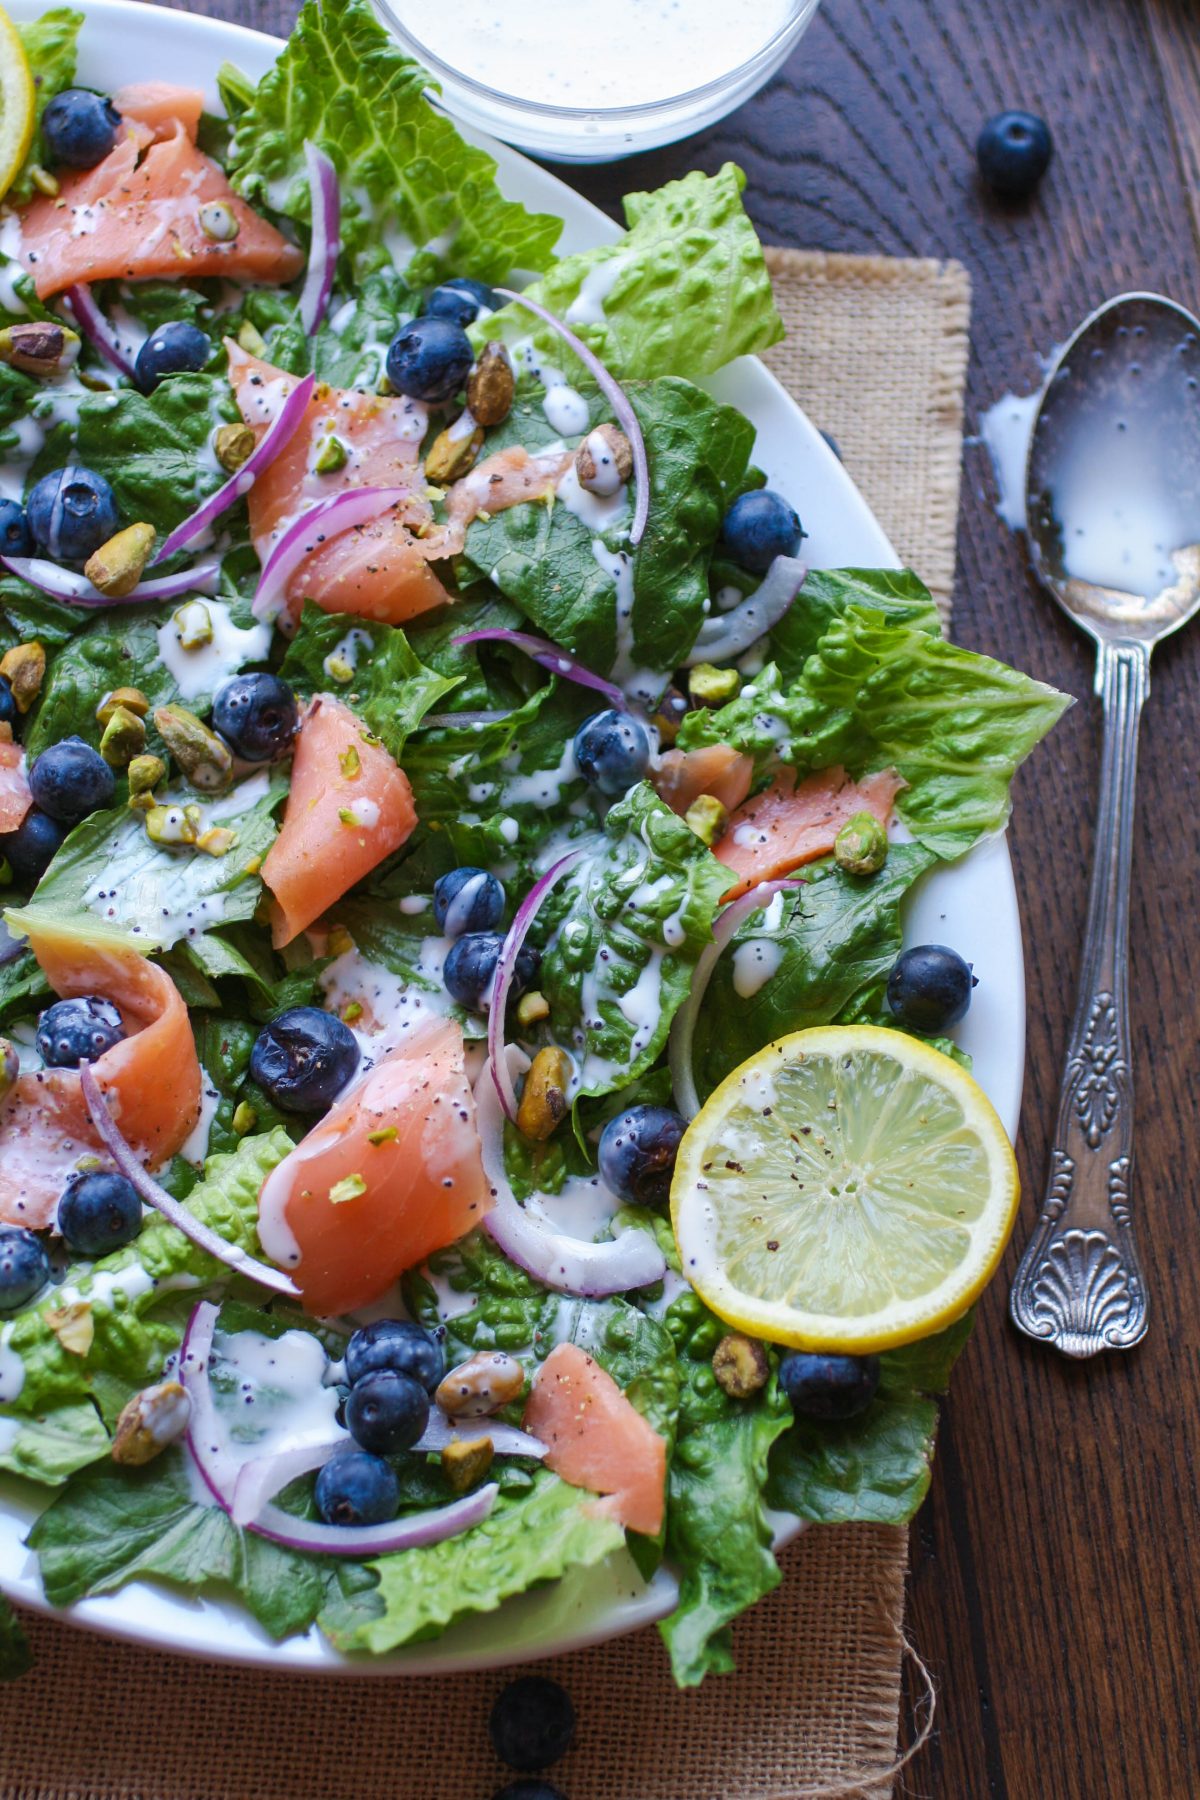 Get Your Greens: 10 Salads We Can't Get Enough of Right Now